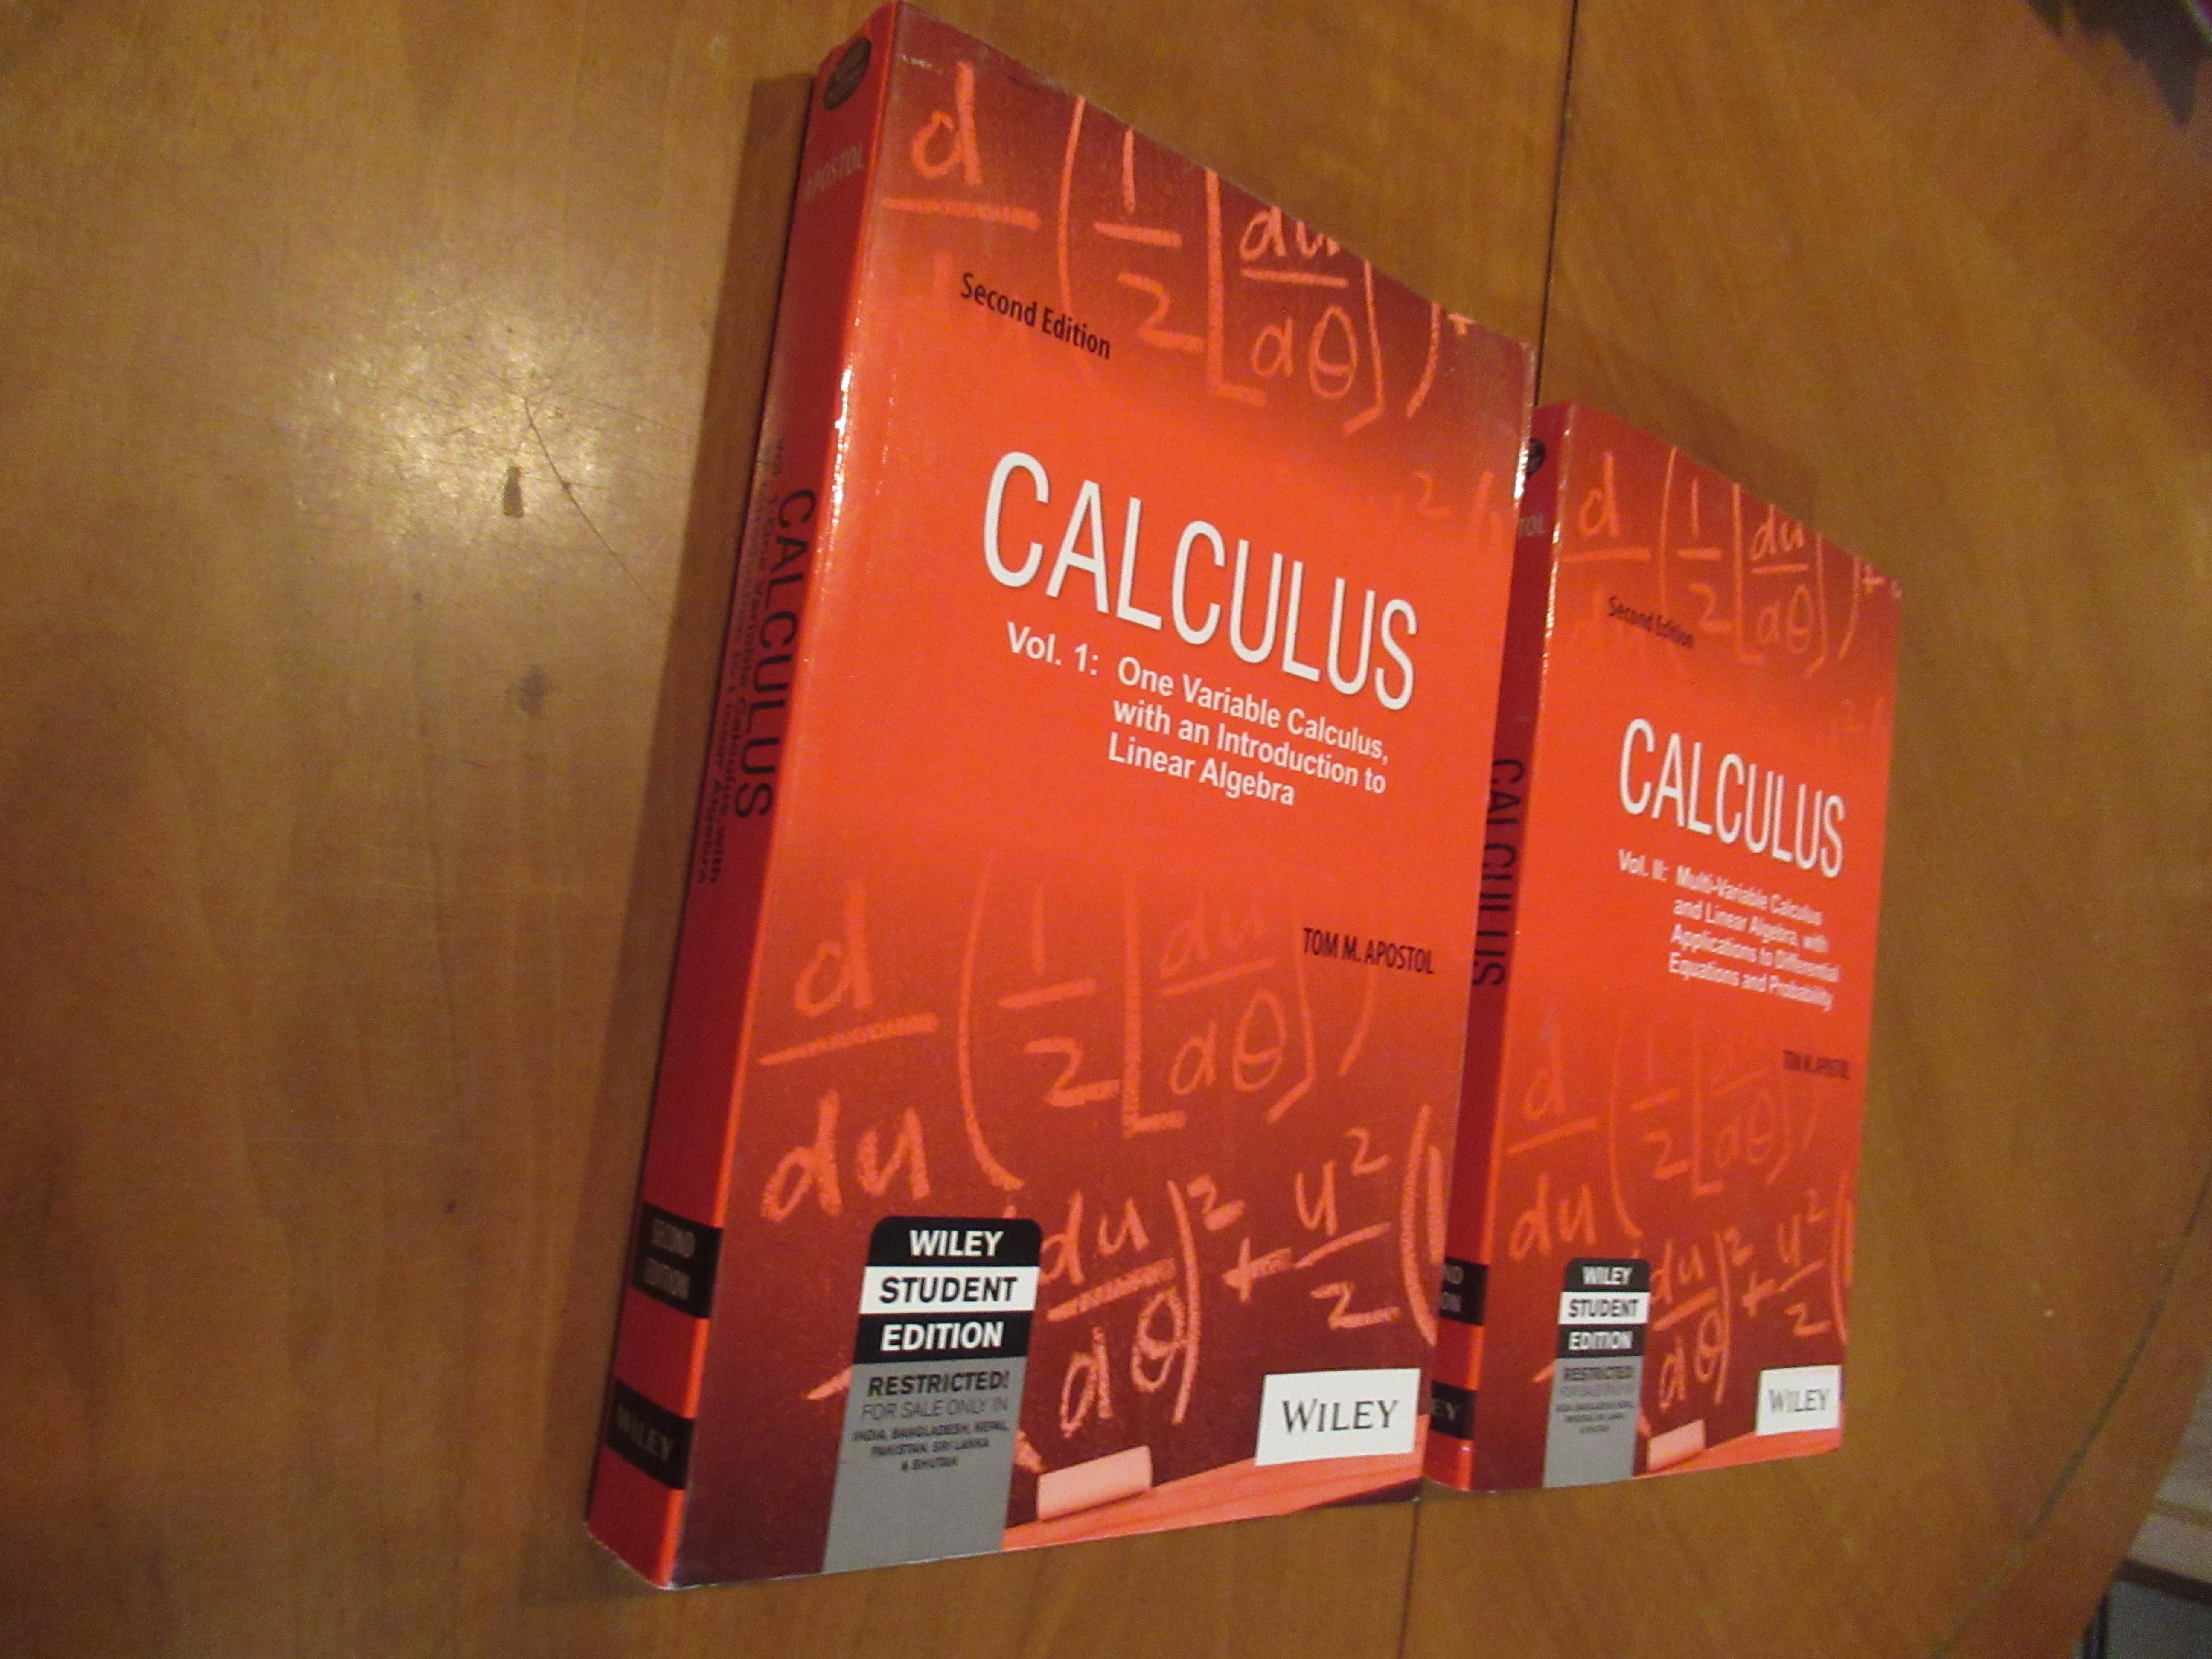 Two Volumes: Calculus, Volume I: One-Variable Calculus With An Introduction To Linear Algebra, 2Nd Edition (And) Calculus, Volume 2 Multi-Variable Calculus And Linear Algebra With Applications To Differential Equations And Probability, Second Edition - Tom M. Apostol